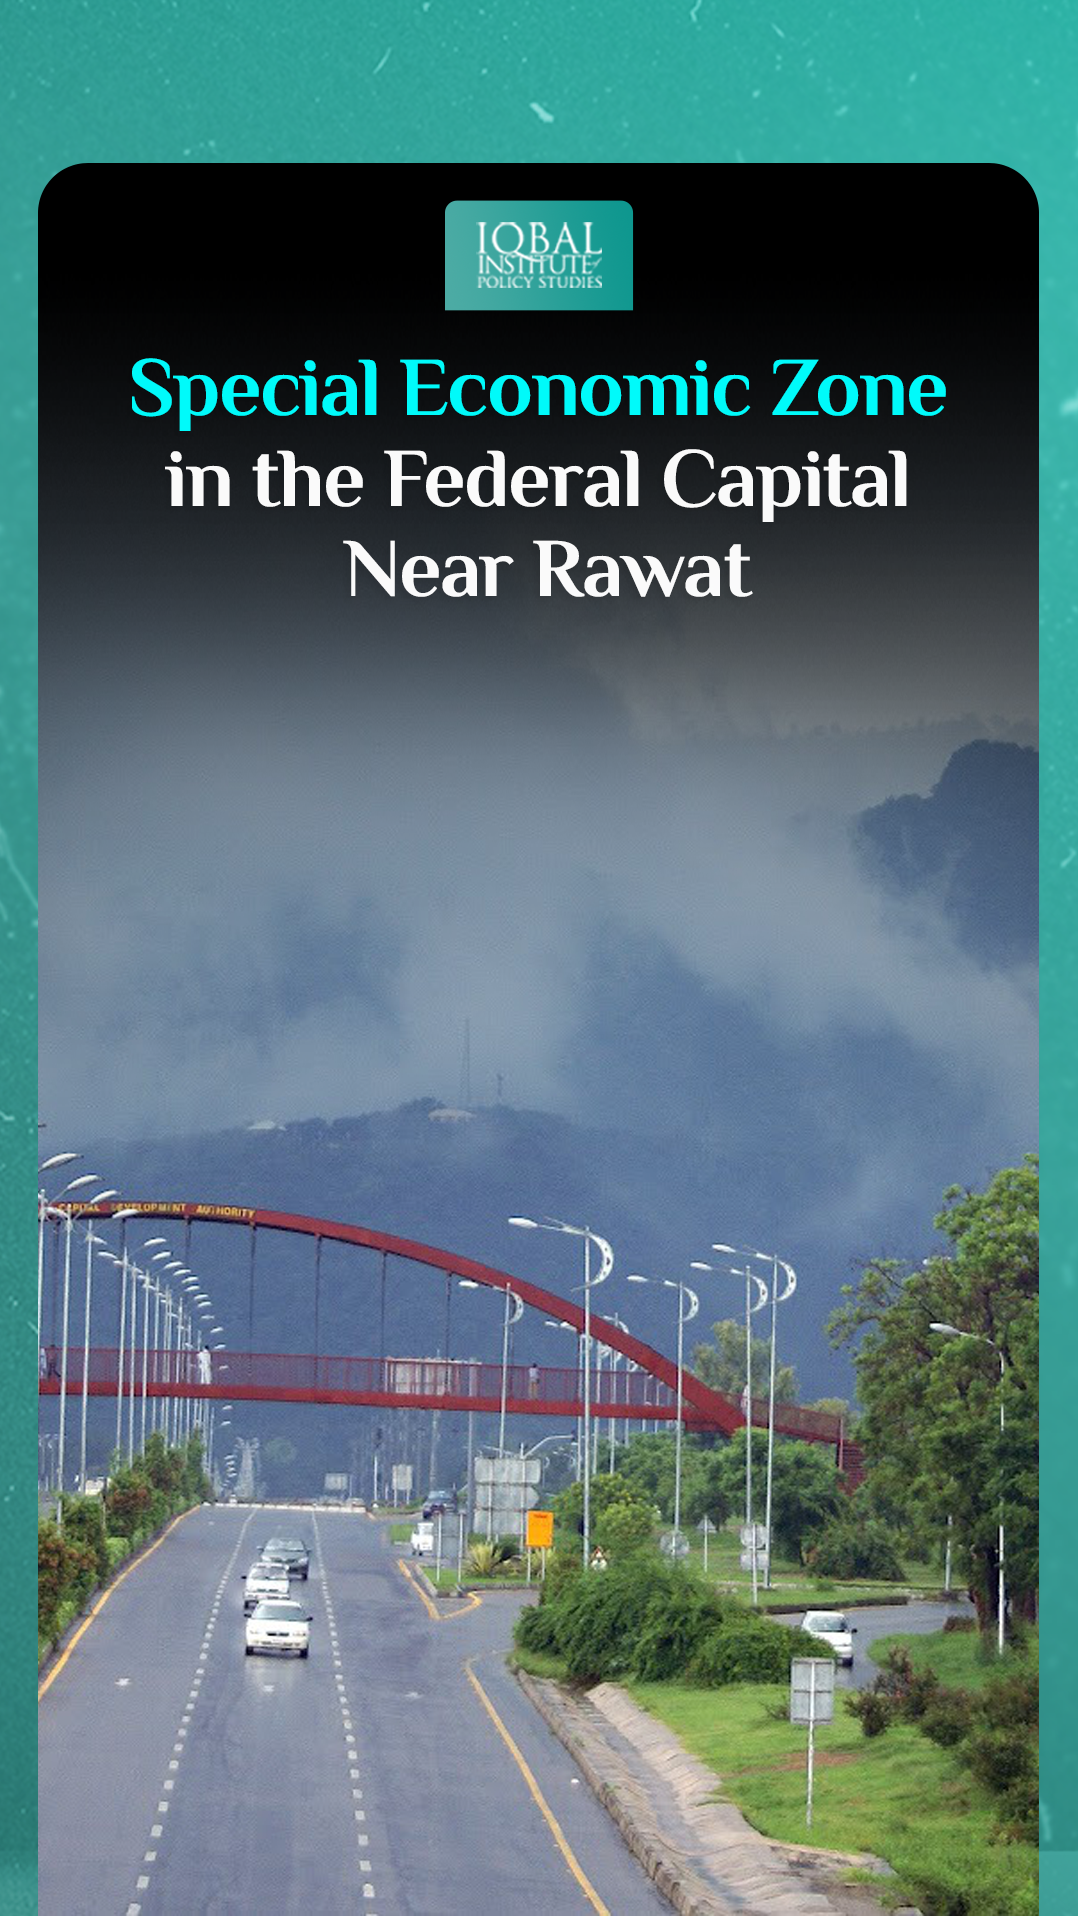 Special Economic Zone in the Federal Capital near Rawat